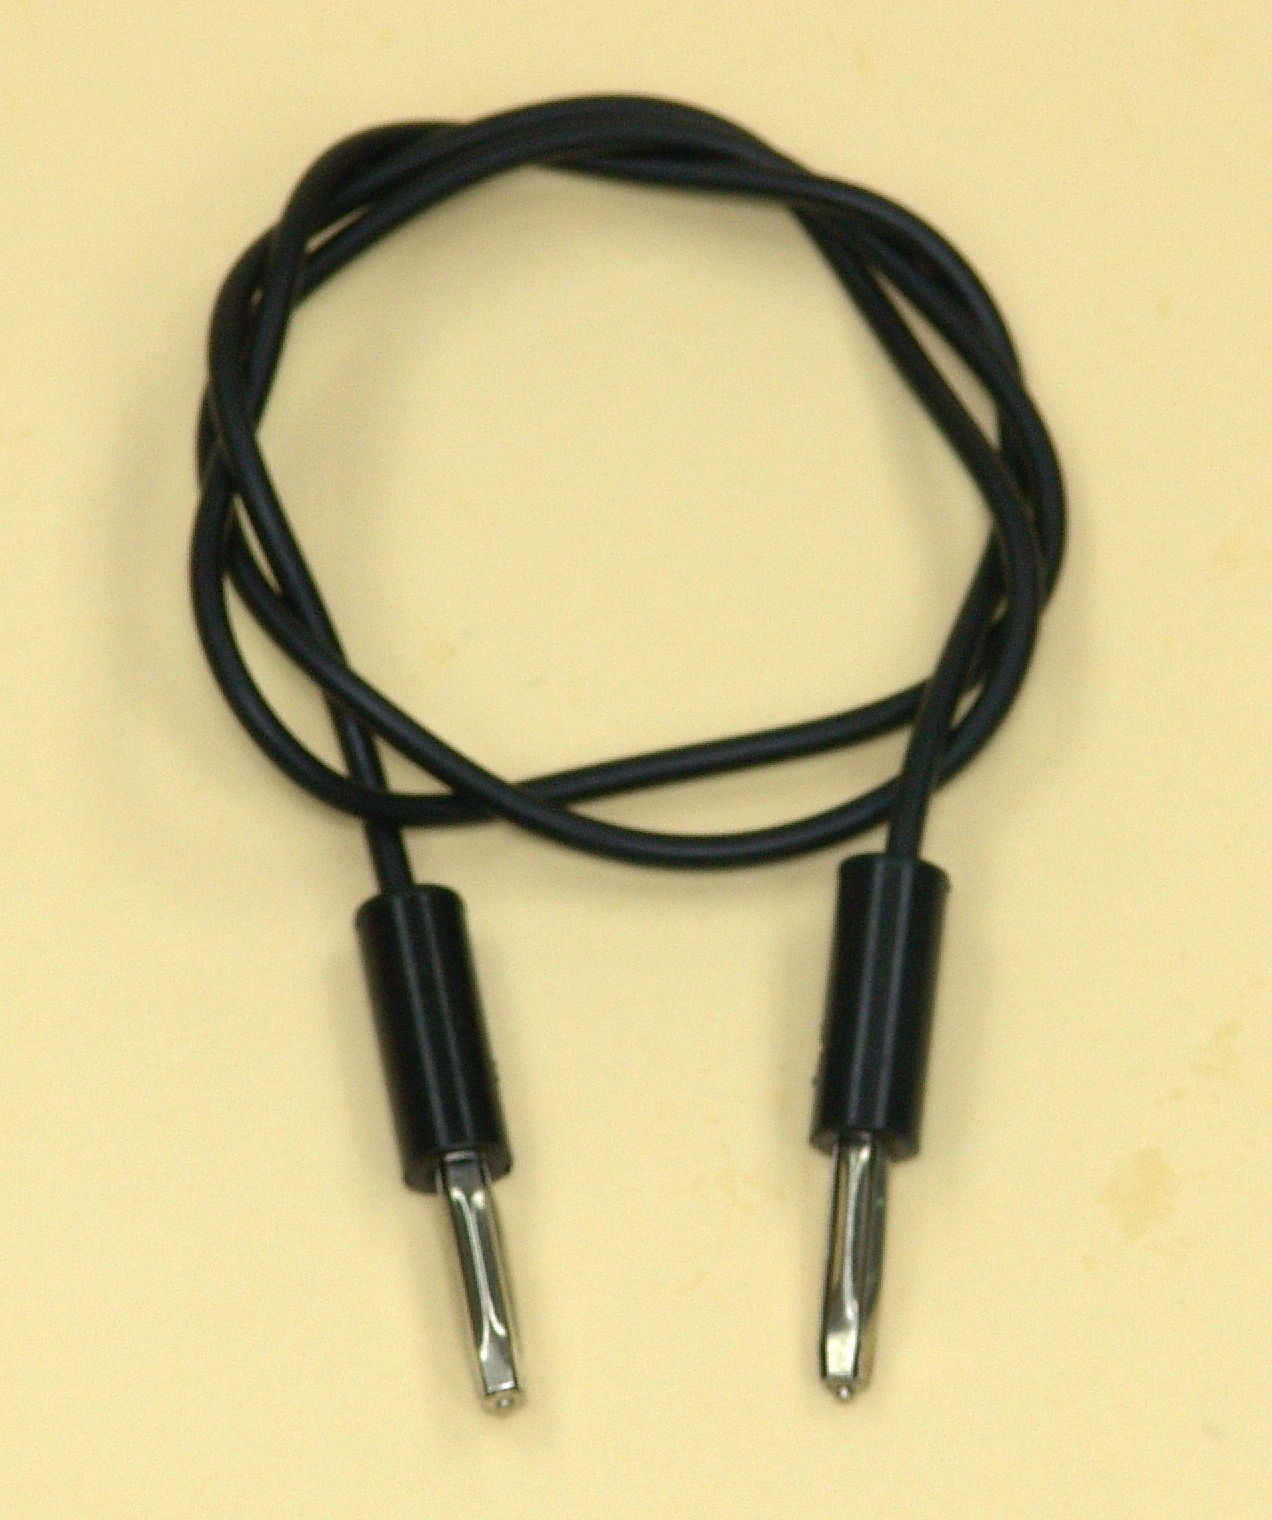 Wire Leads with Banana Plug Cords